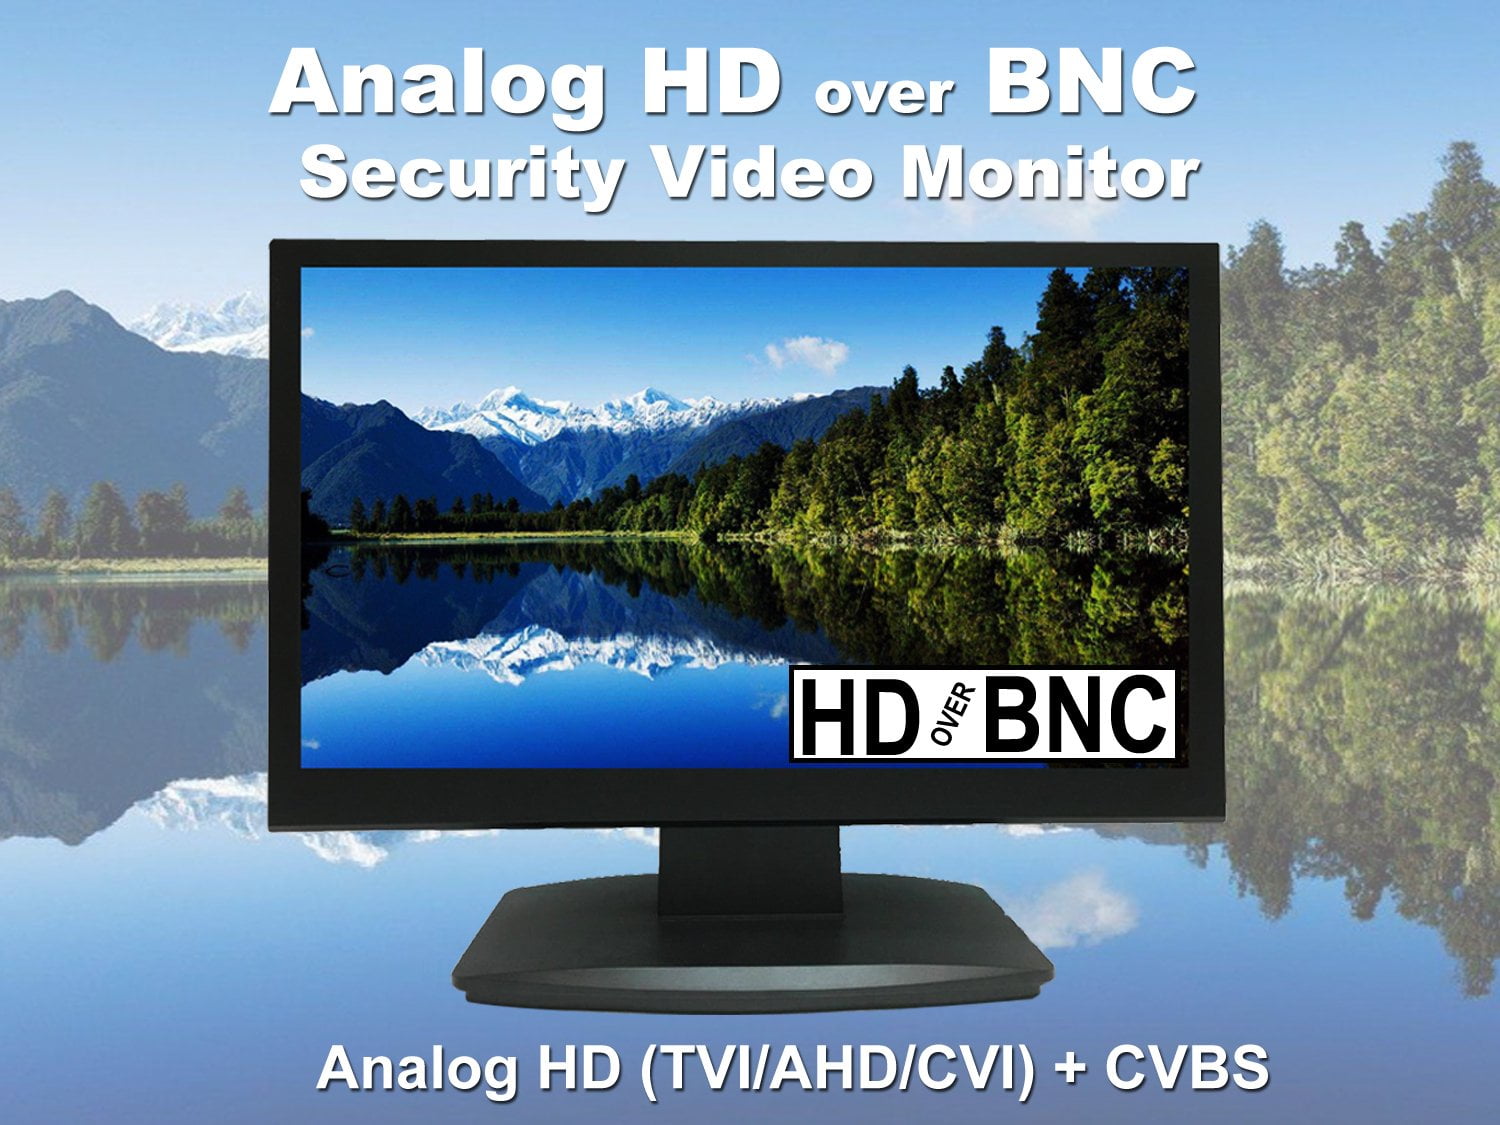 82-20530 - 19 LED Security Monitor with BNC VGA and HDMI Input